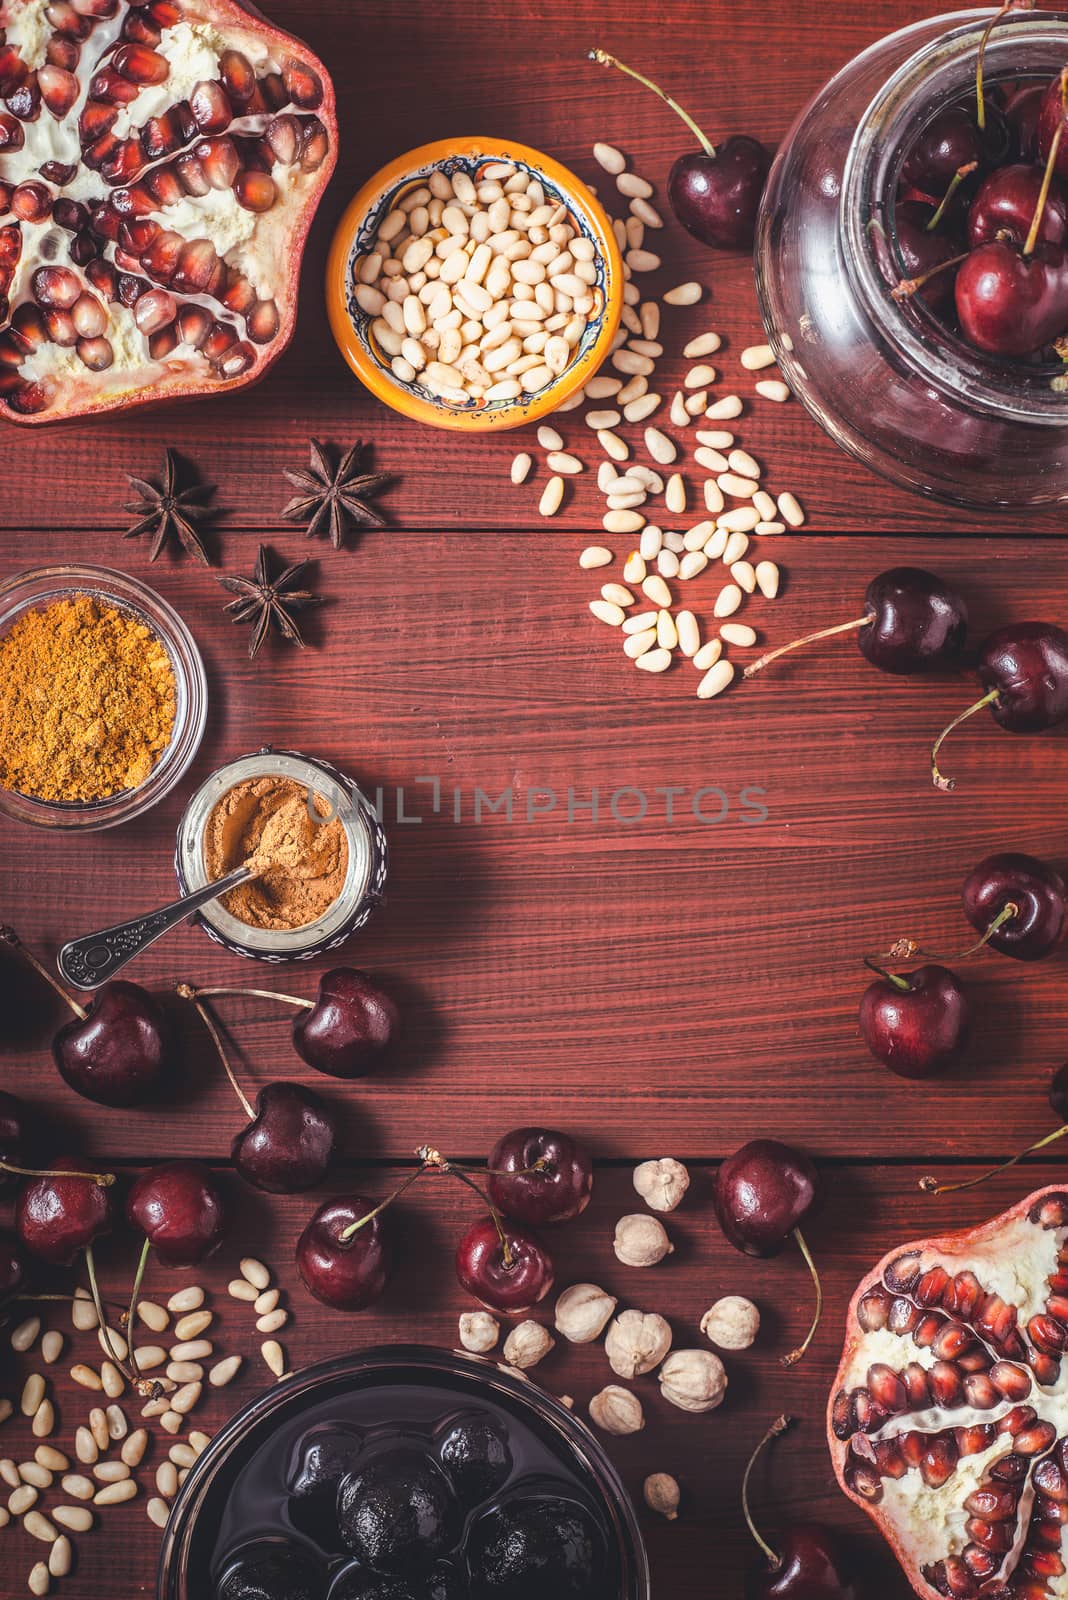 Different fruit and spices on the red wooden table. Concept of oriental fruits by Deniskarpenkov